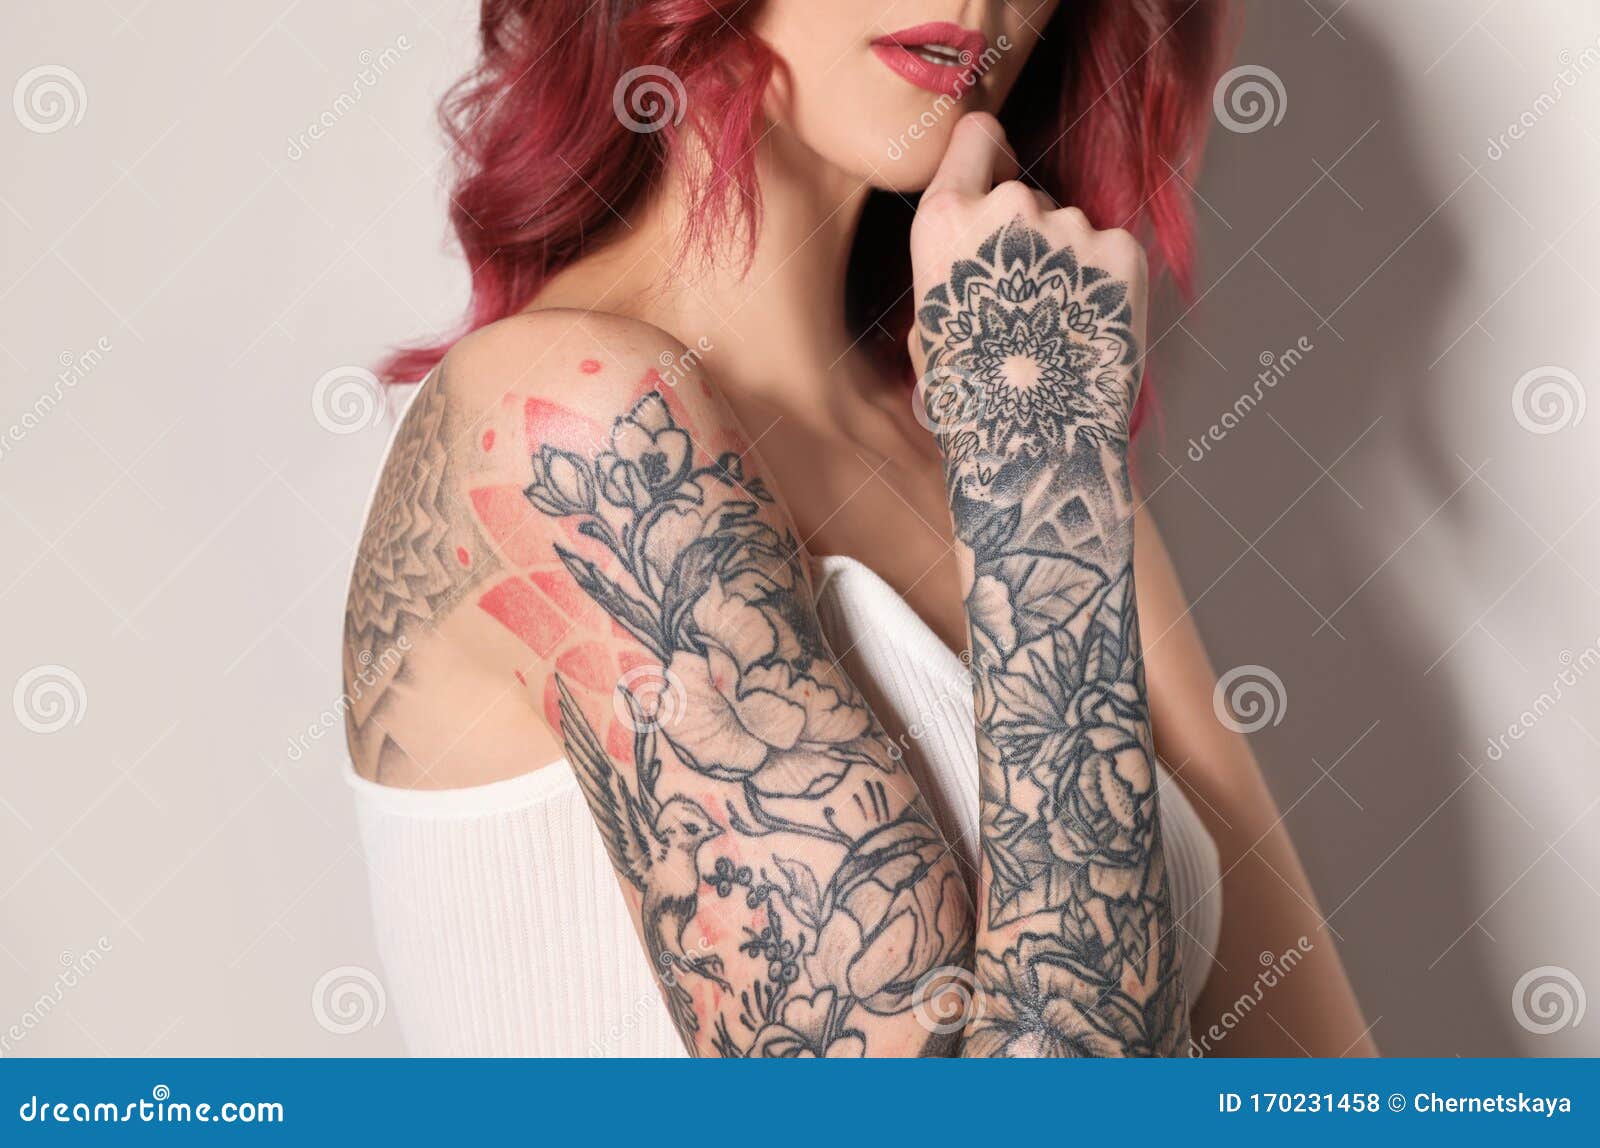 Young woman with tattoos stock image Image of alternative  37977693